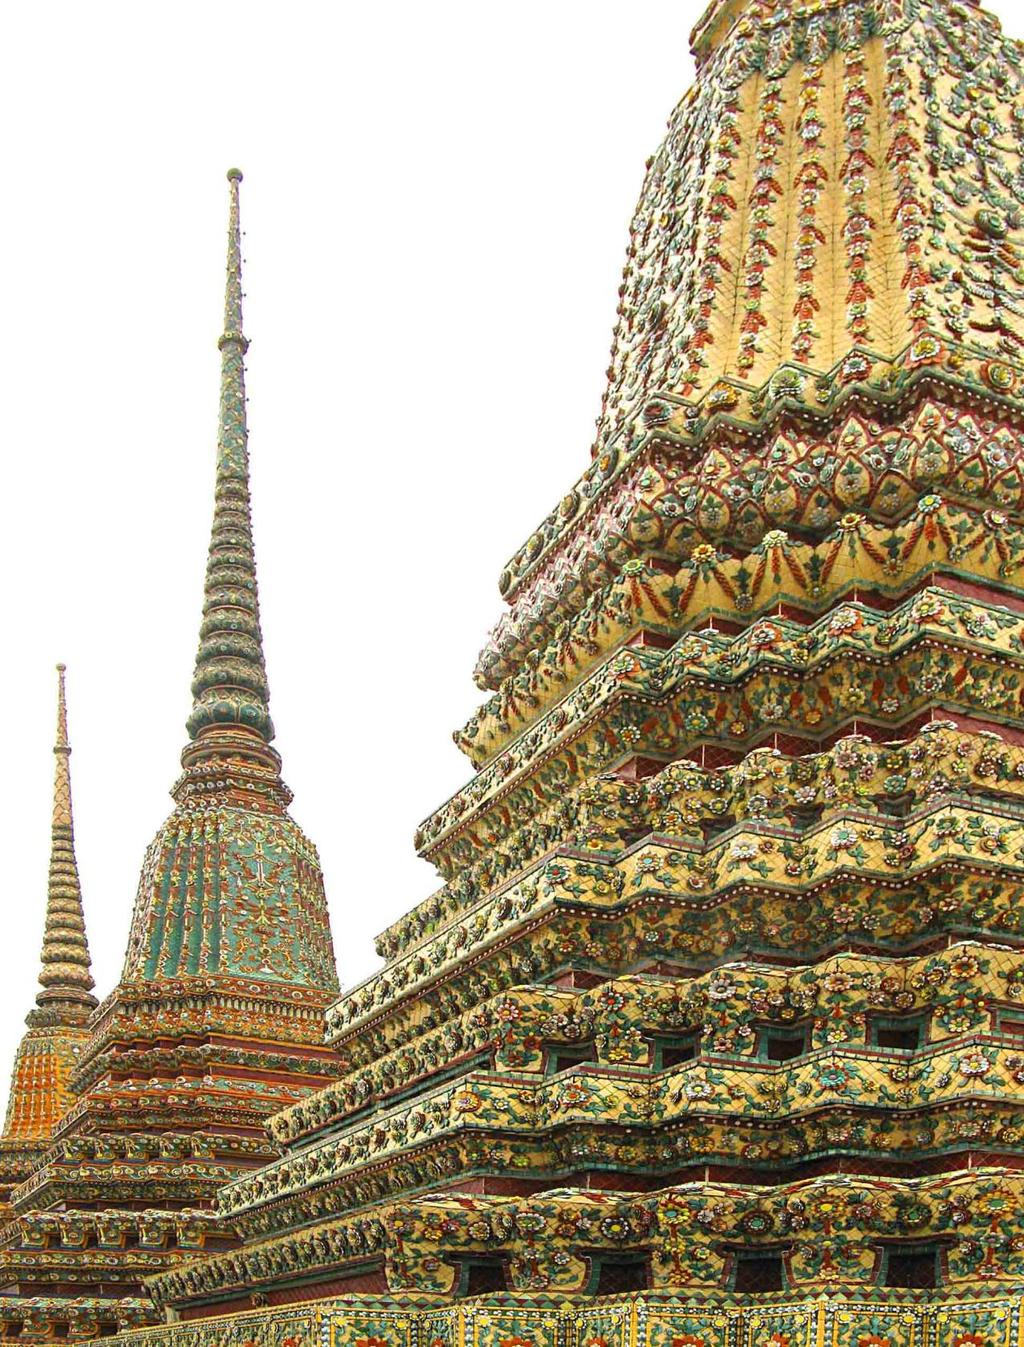 There are some 95 chedis (stupas, pagodas) of various sizes at Wat Pho, incredibly decorated with millions of colorful ceramic tiles of various sizes and